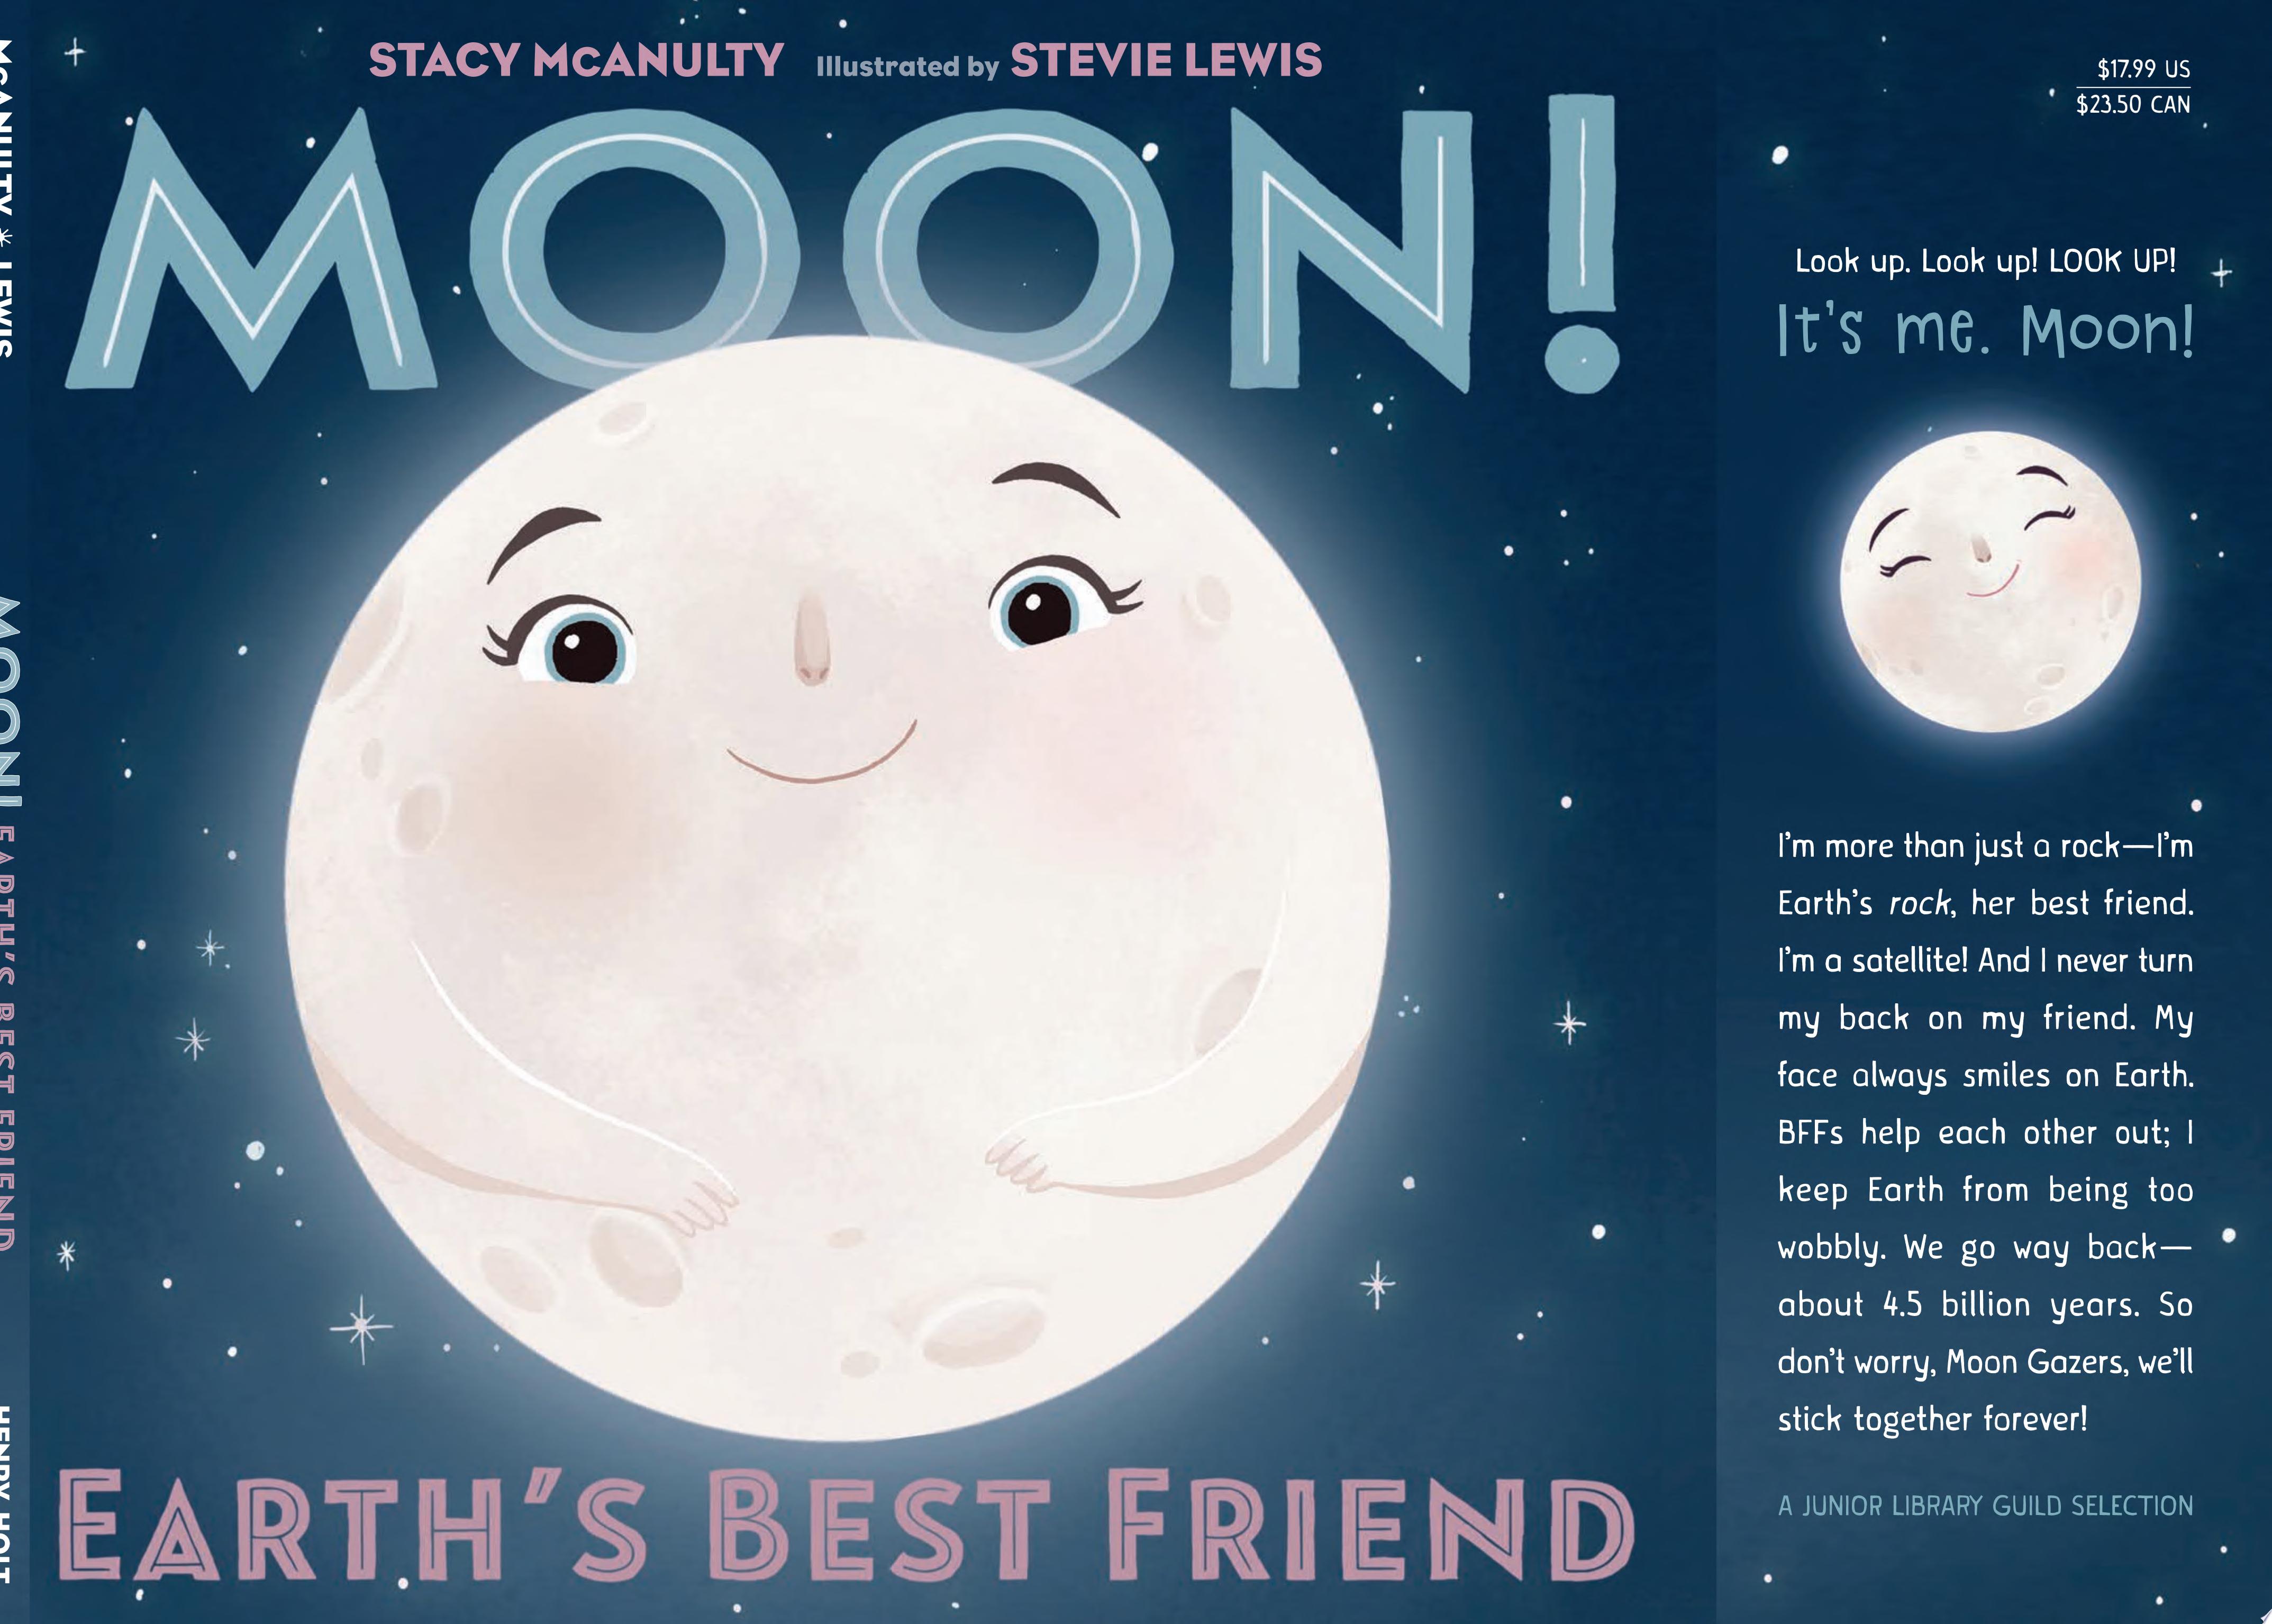 Image for "Moon! Earth&#039;s Best Friend"